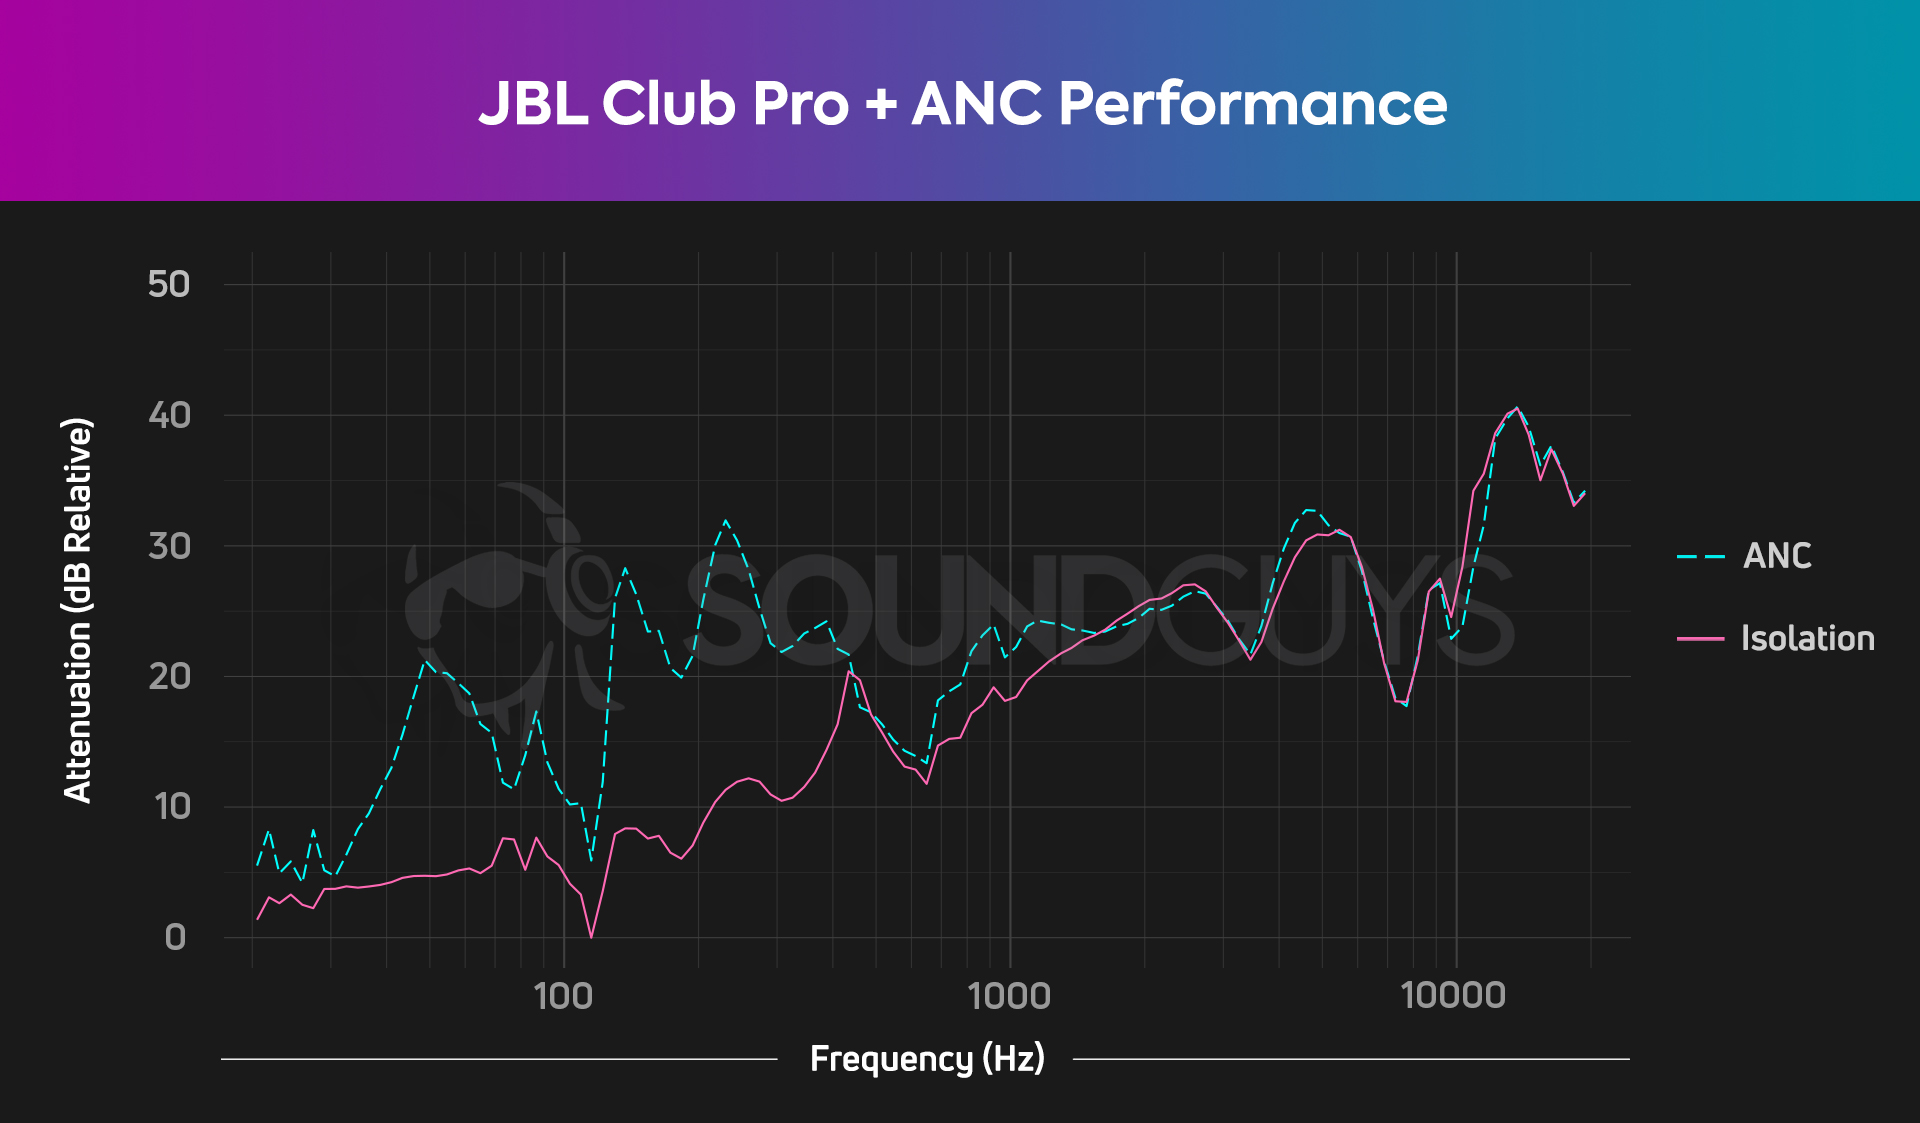 An isolation chart for the JBL Club Pro +, which shows solid ANC and isolation performance